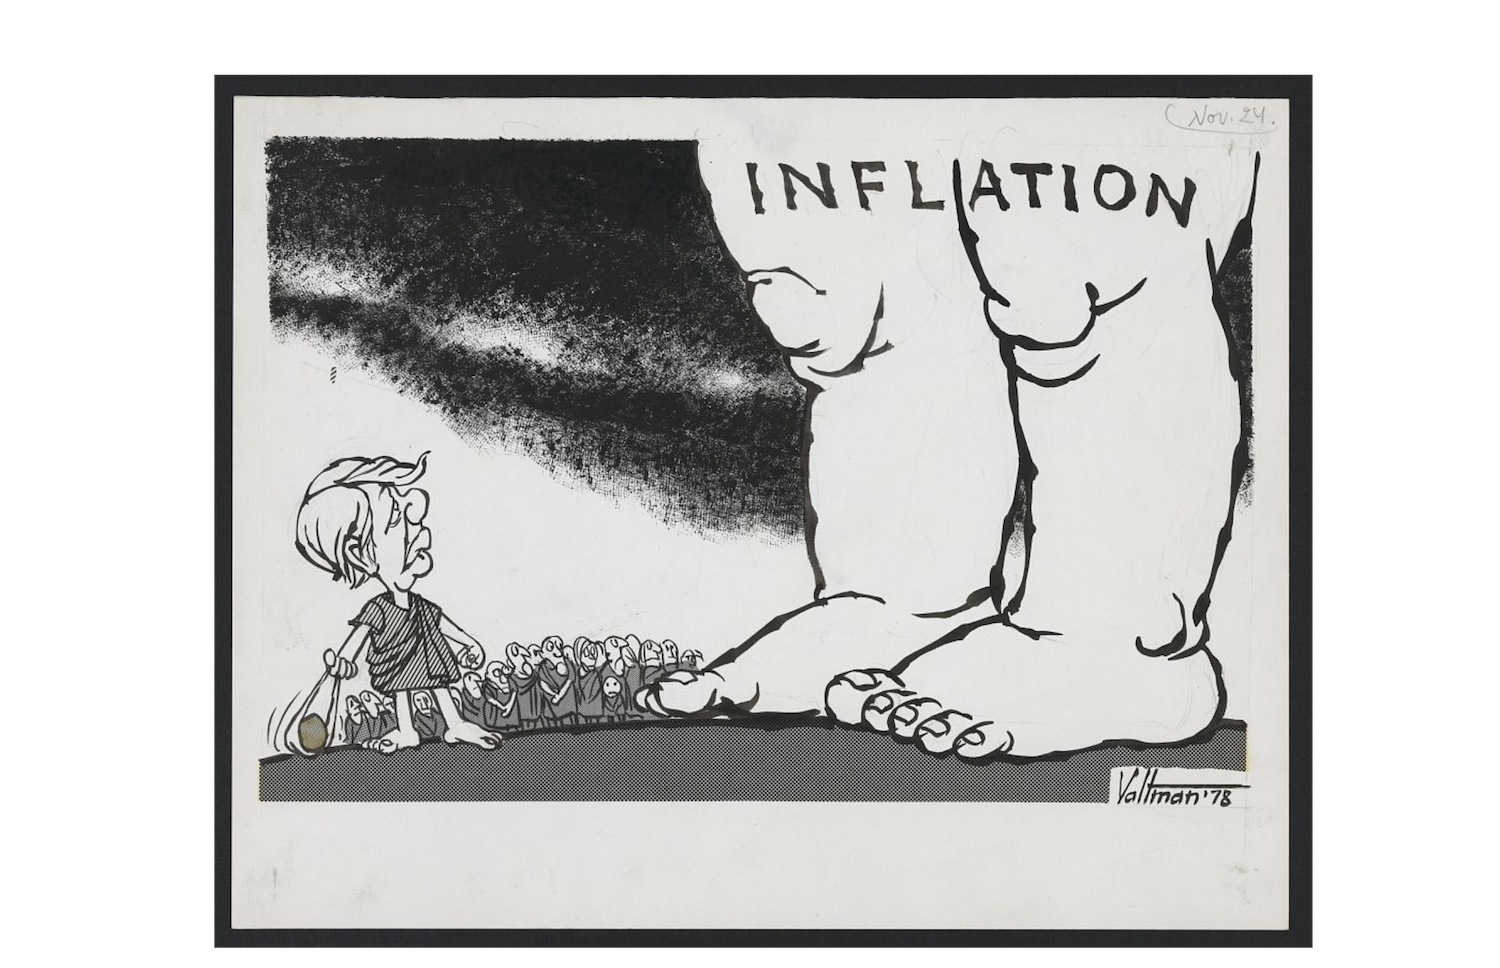 A political cartoon from 1978 depicting a David and Goliath biblical recreation. US President Jimmy Carter is David, while Inflation is Goliath